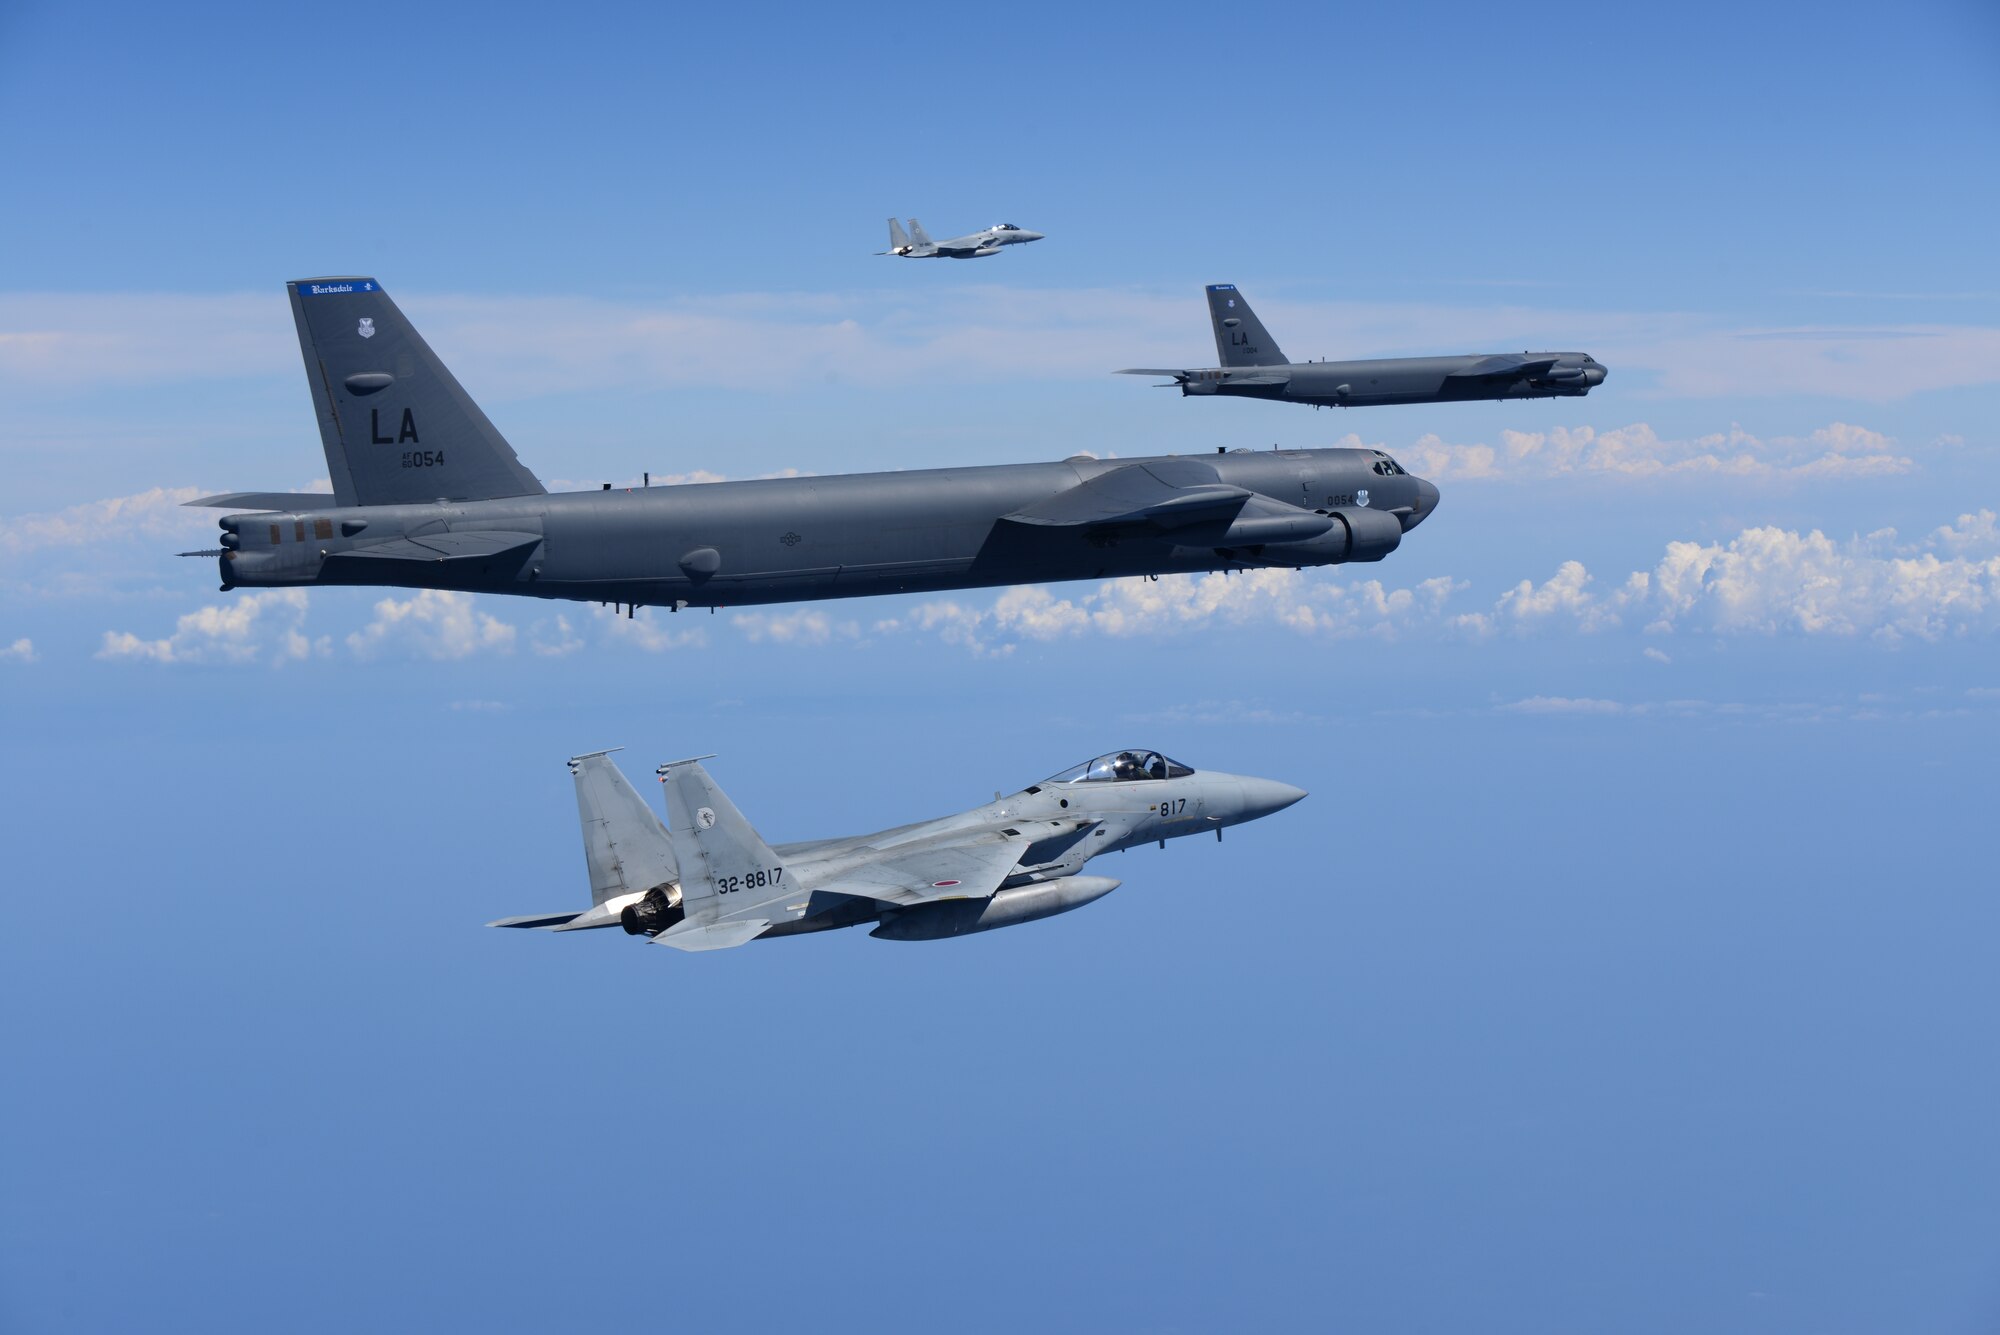 Two U.S. Air Force B-52H Stratofortress bombers and two Koku Jieitai (Japan Air Self-Defense Force) F-15 fighters execute a routine bilateral training mission in the vicinity of Japan, July 26, 2018. This mission was flown in support of U.S. Indo-Pacific Command’s Continuous Bomber Presence (CBP) operations, which are a key component to improving combined and joint service interoperability. Bilateral training missions such as this allow the two countries to improve upon combined capabilities, tactical skills, and relationships. (Courtesy Photo)